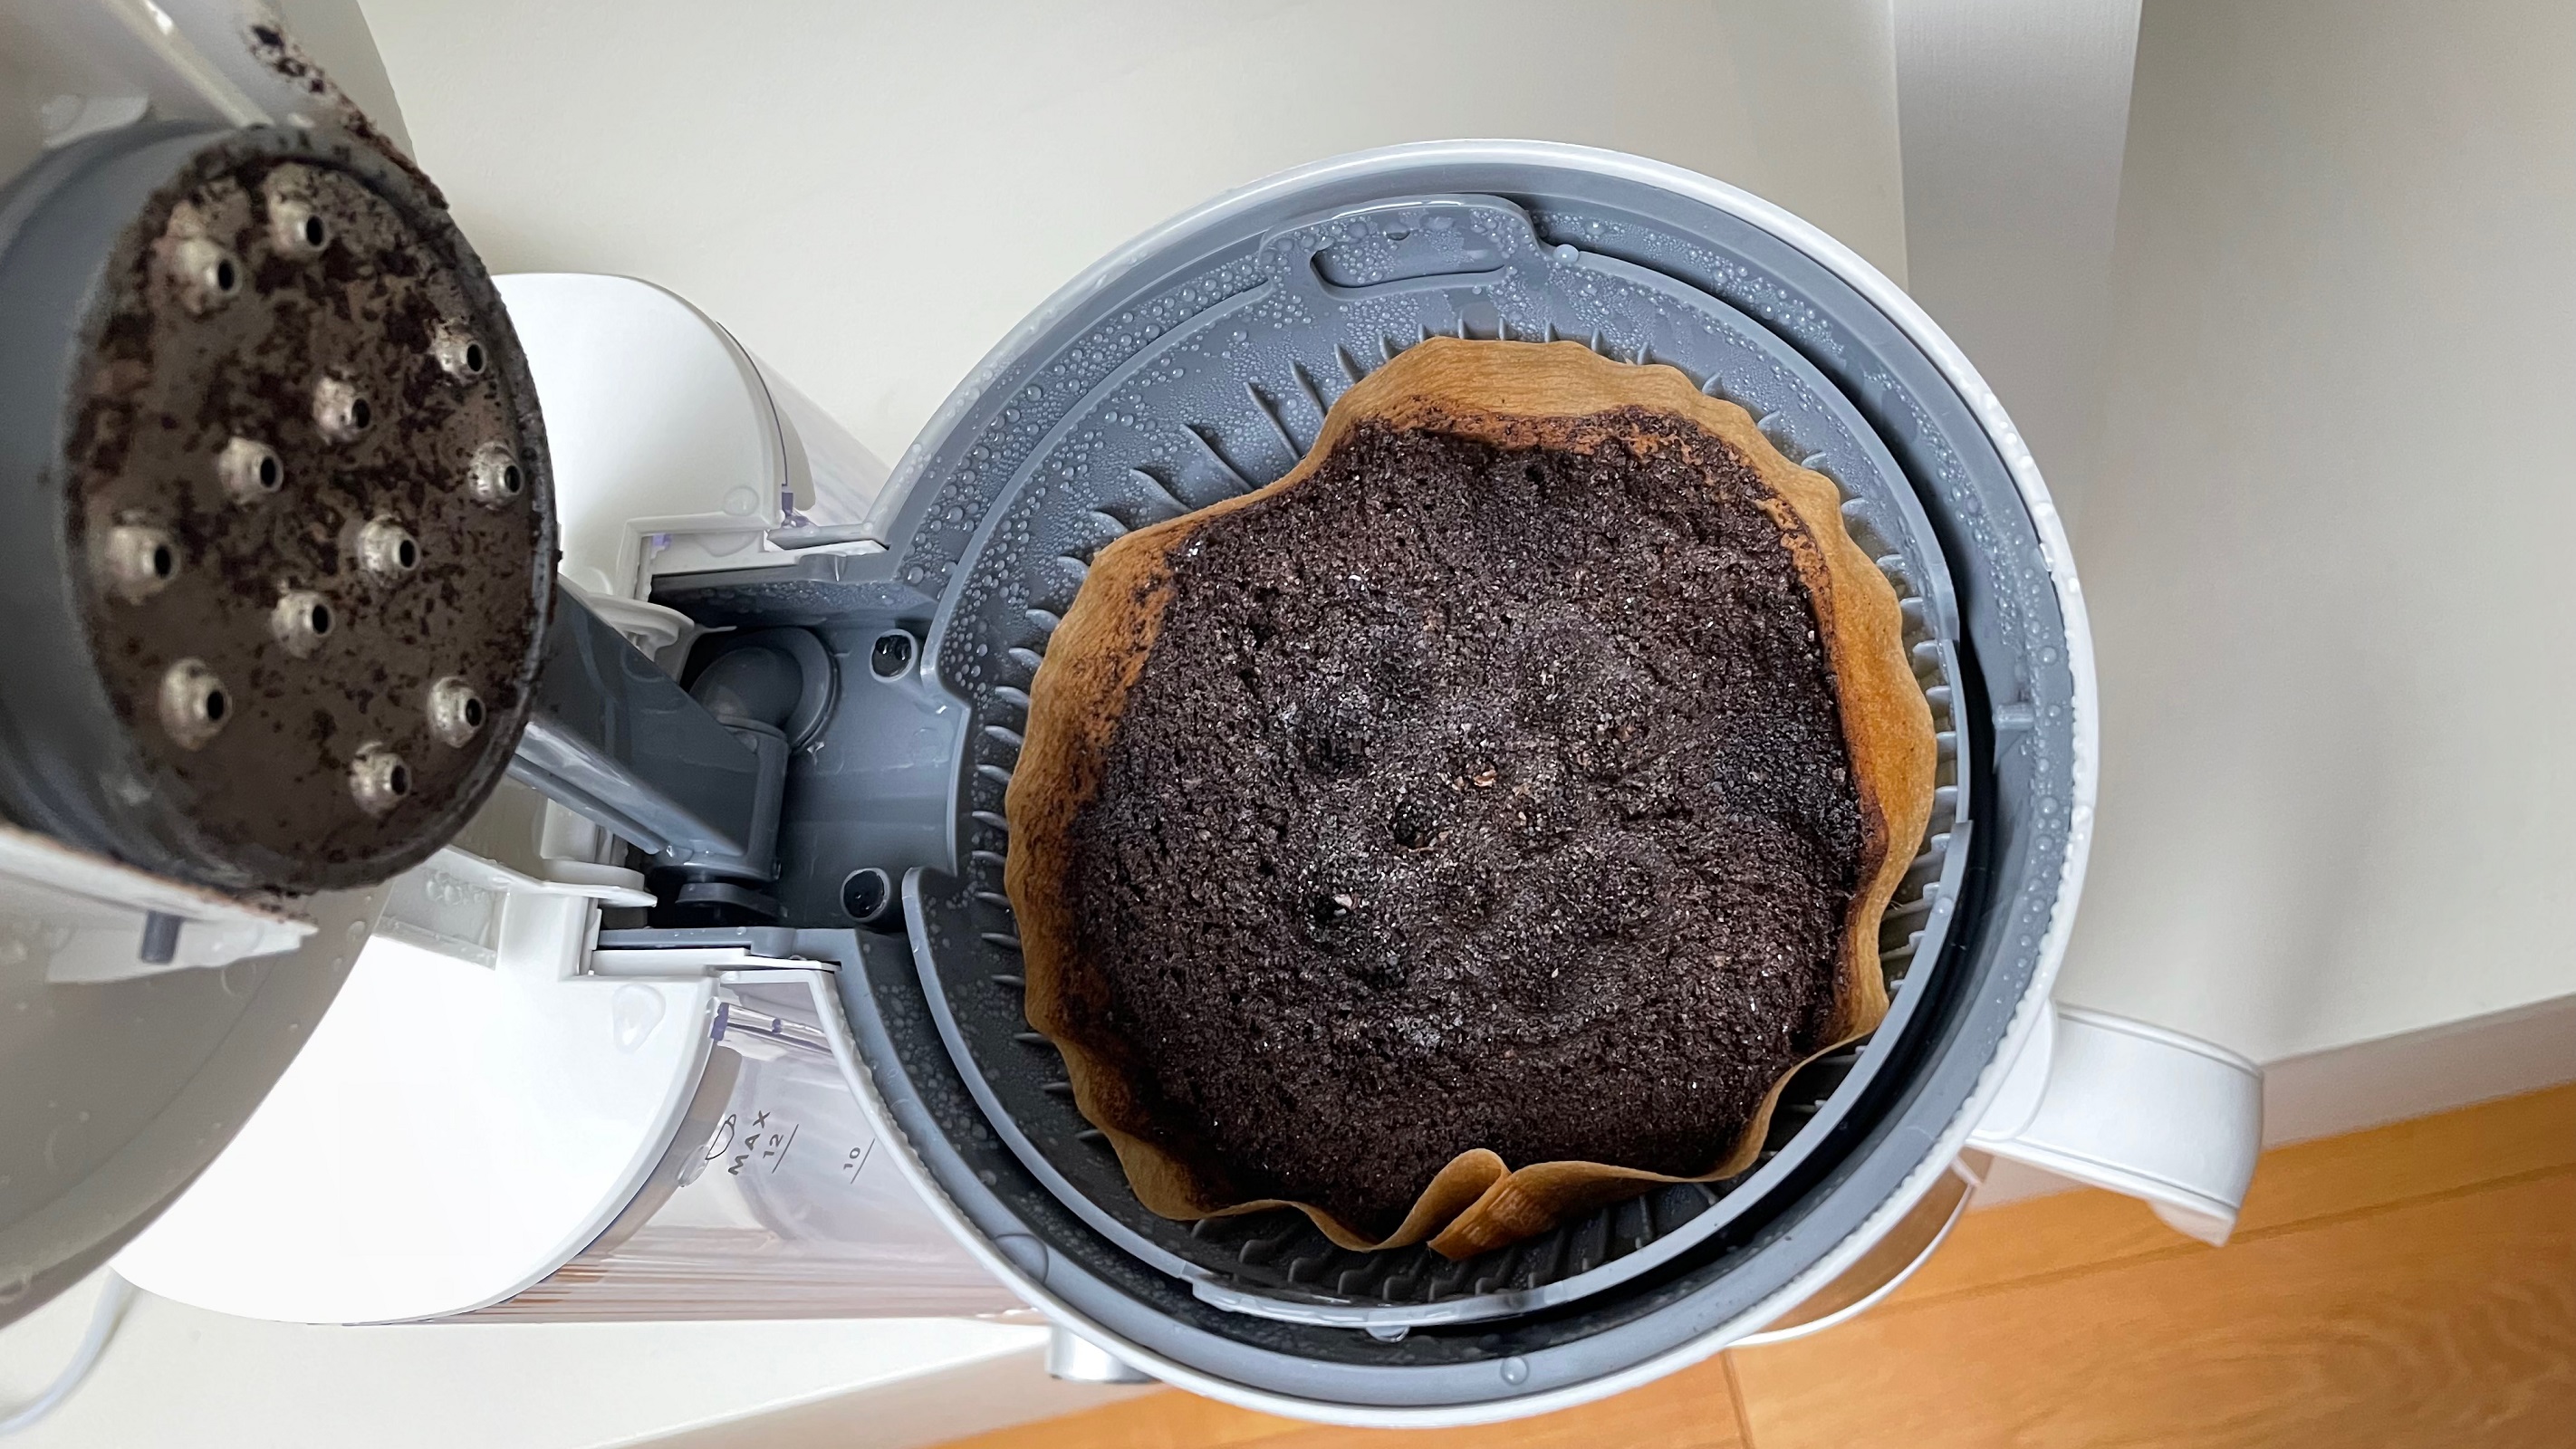 Used coffee grounds in the Zwilling coffee maker